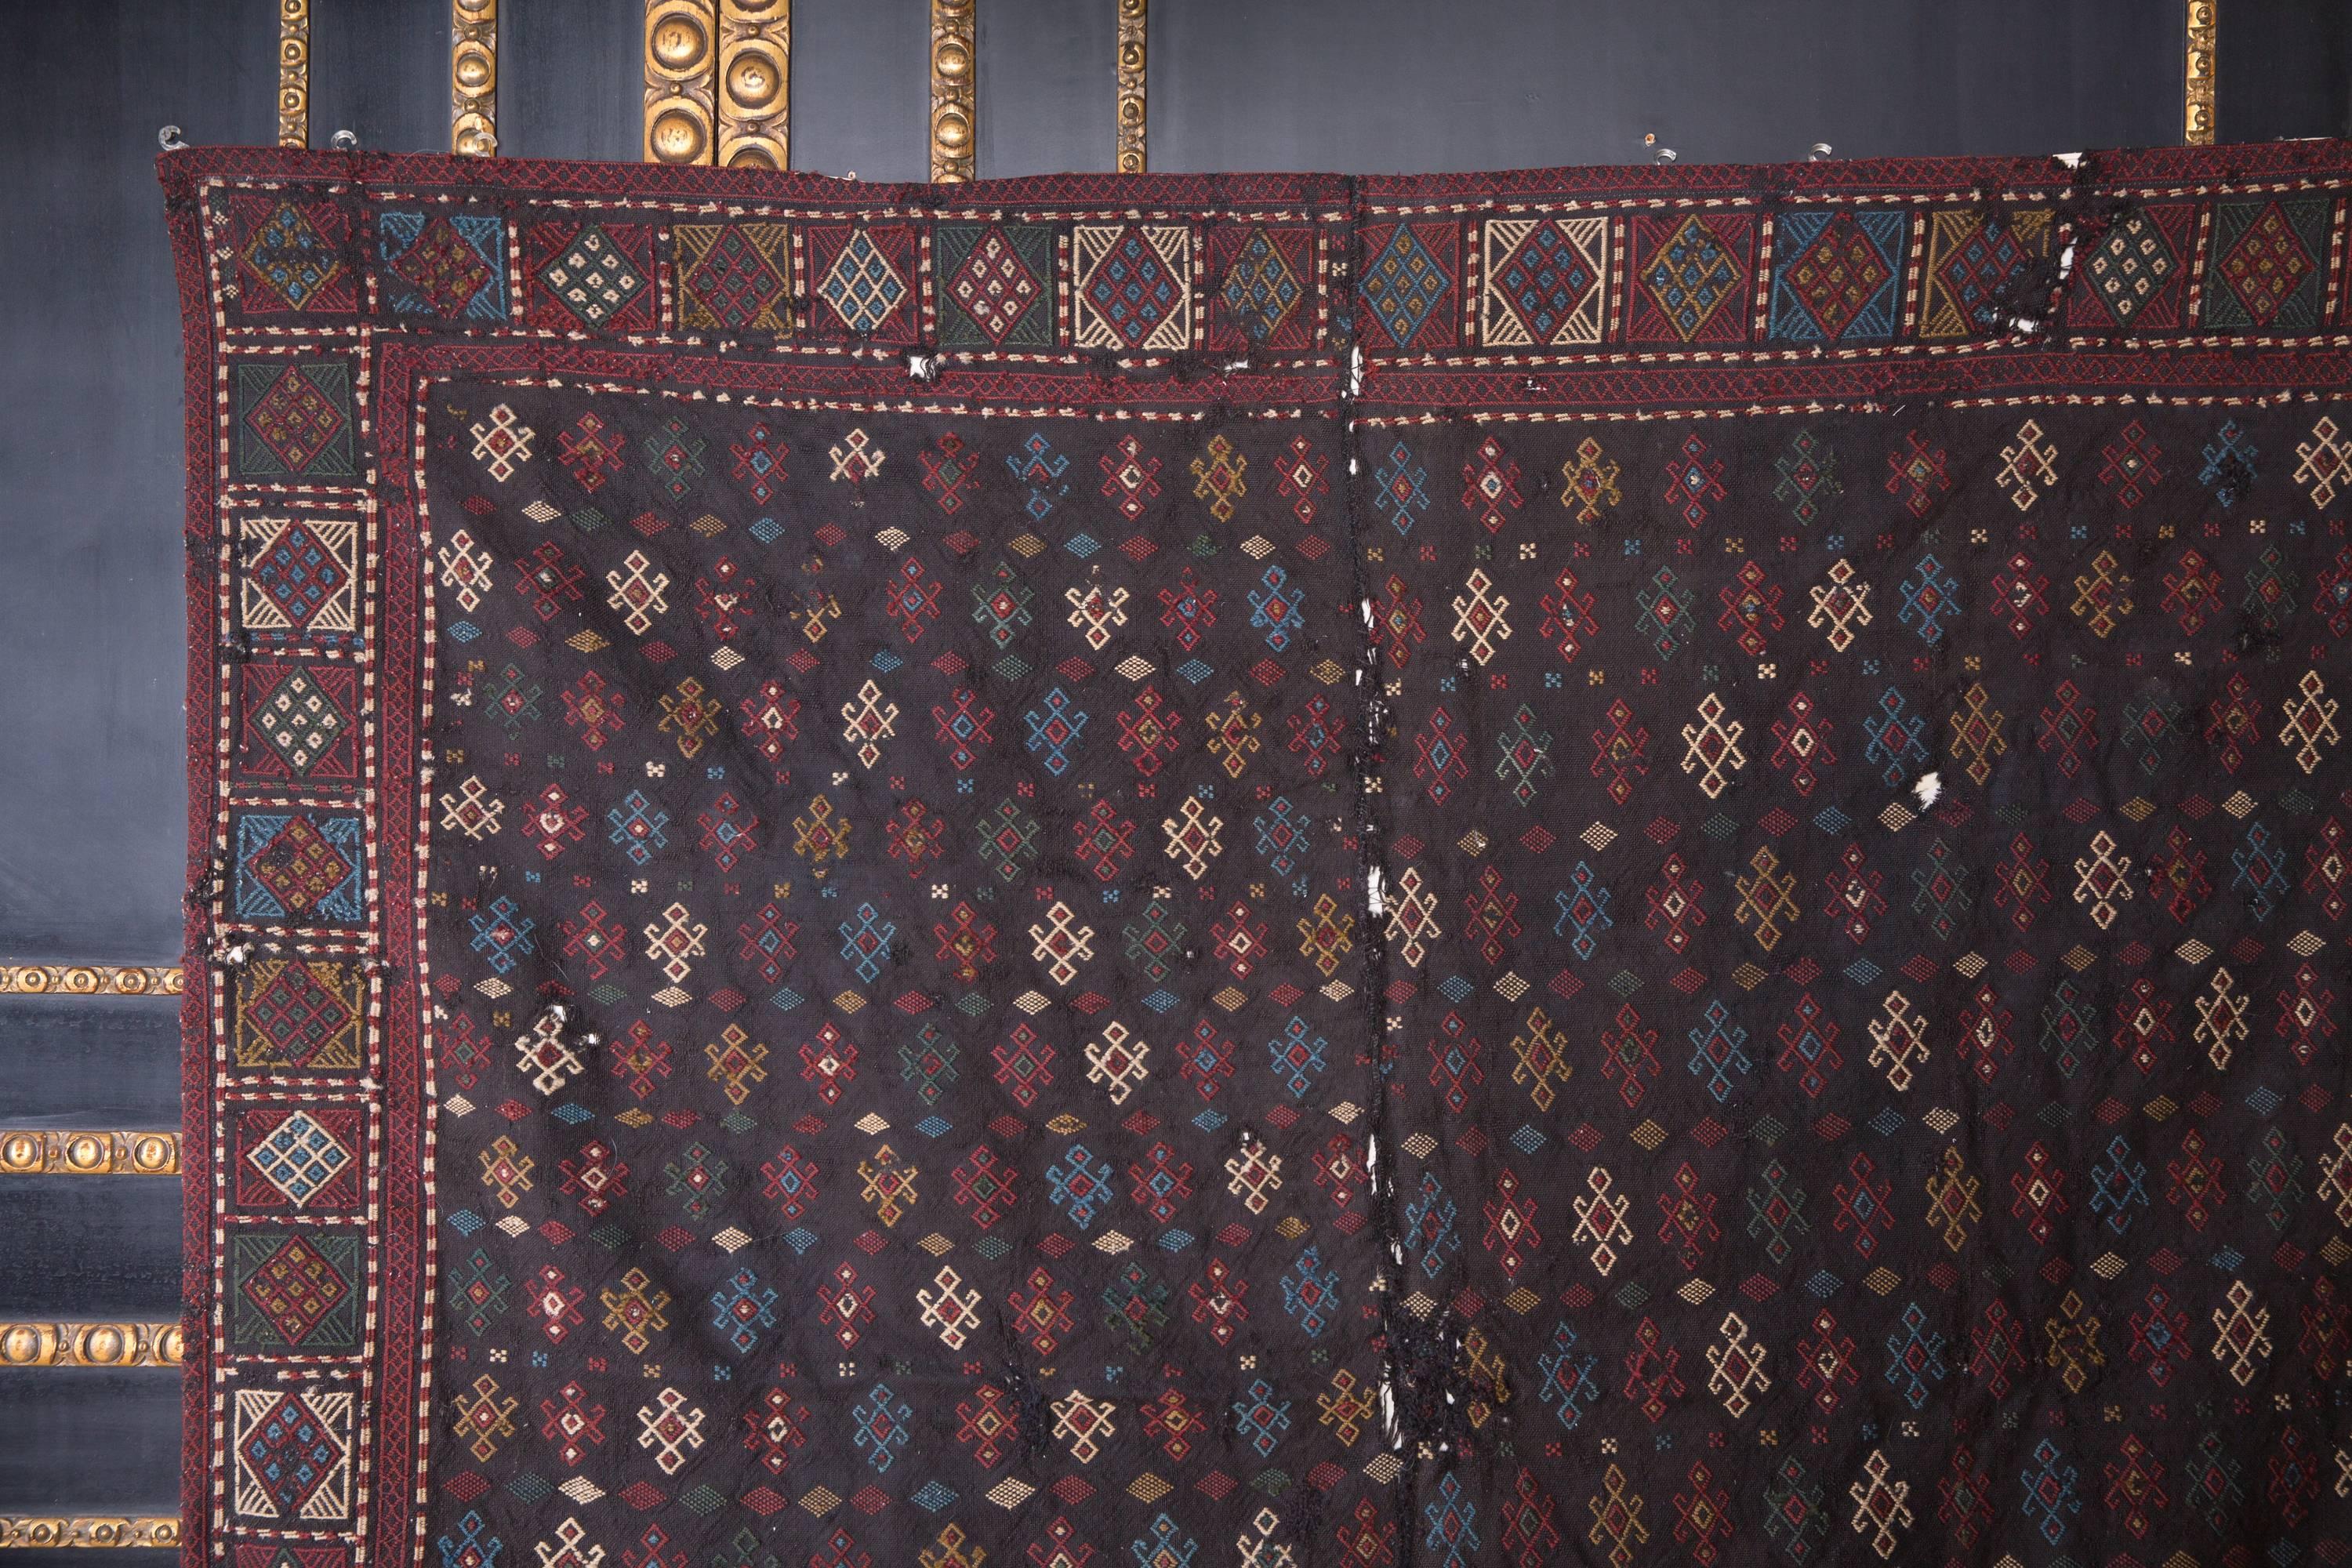 Wonderful rare verné carpet. From Berlin villa resolution.

Please take a look at the detailed pictures.